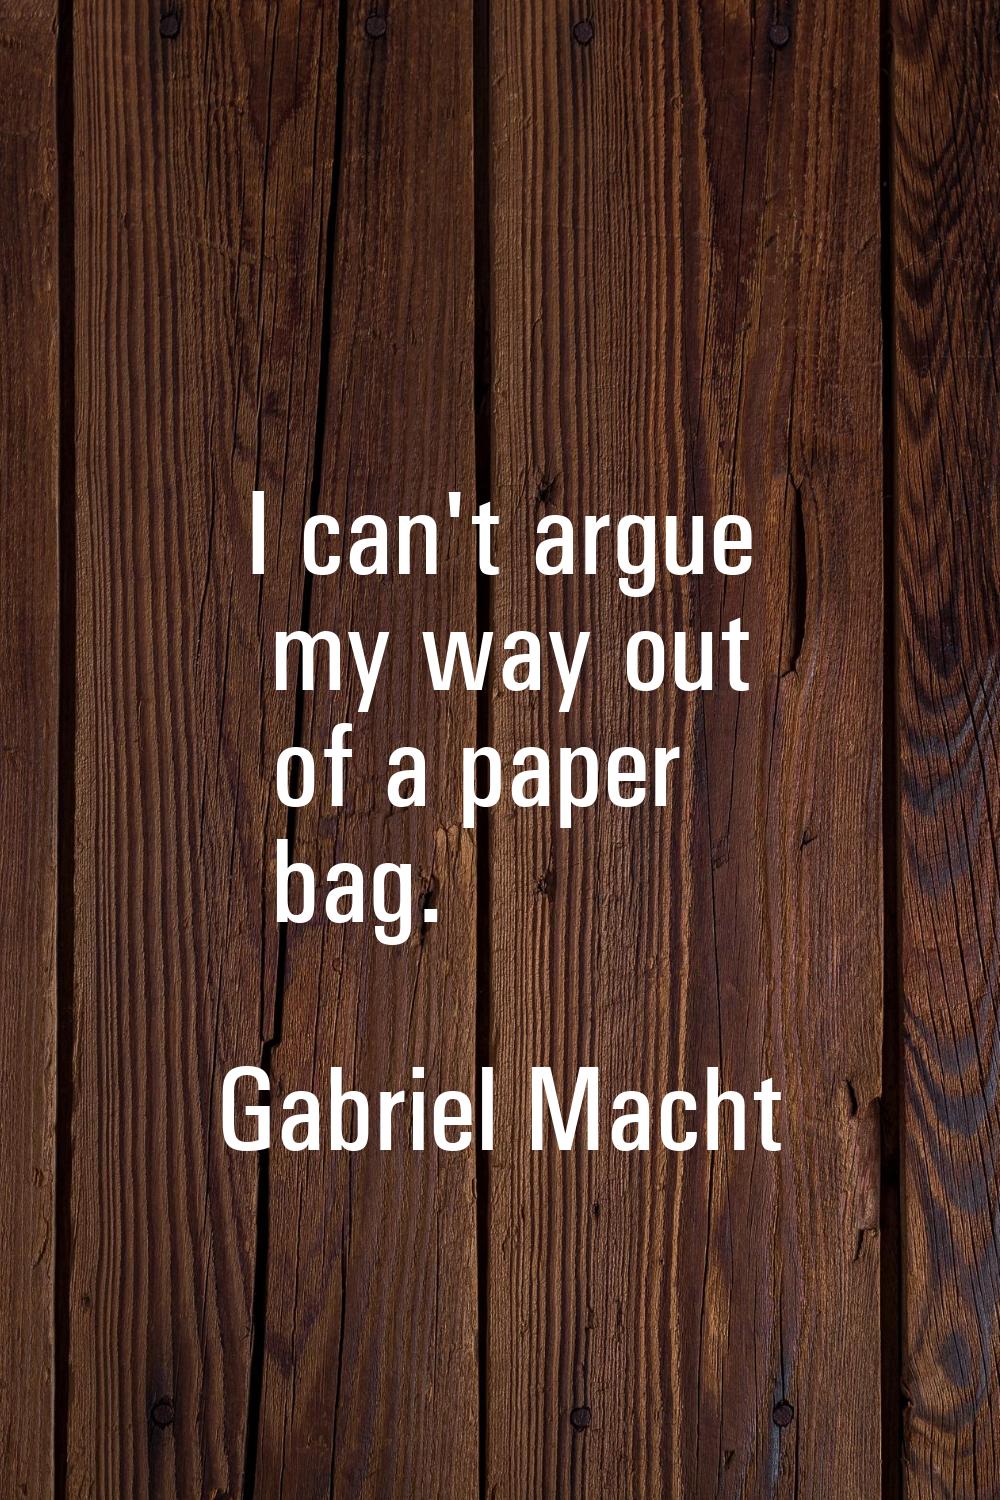 I can't argue my way out of a paper bag.